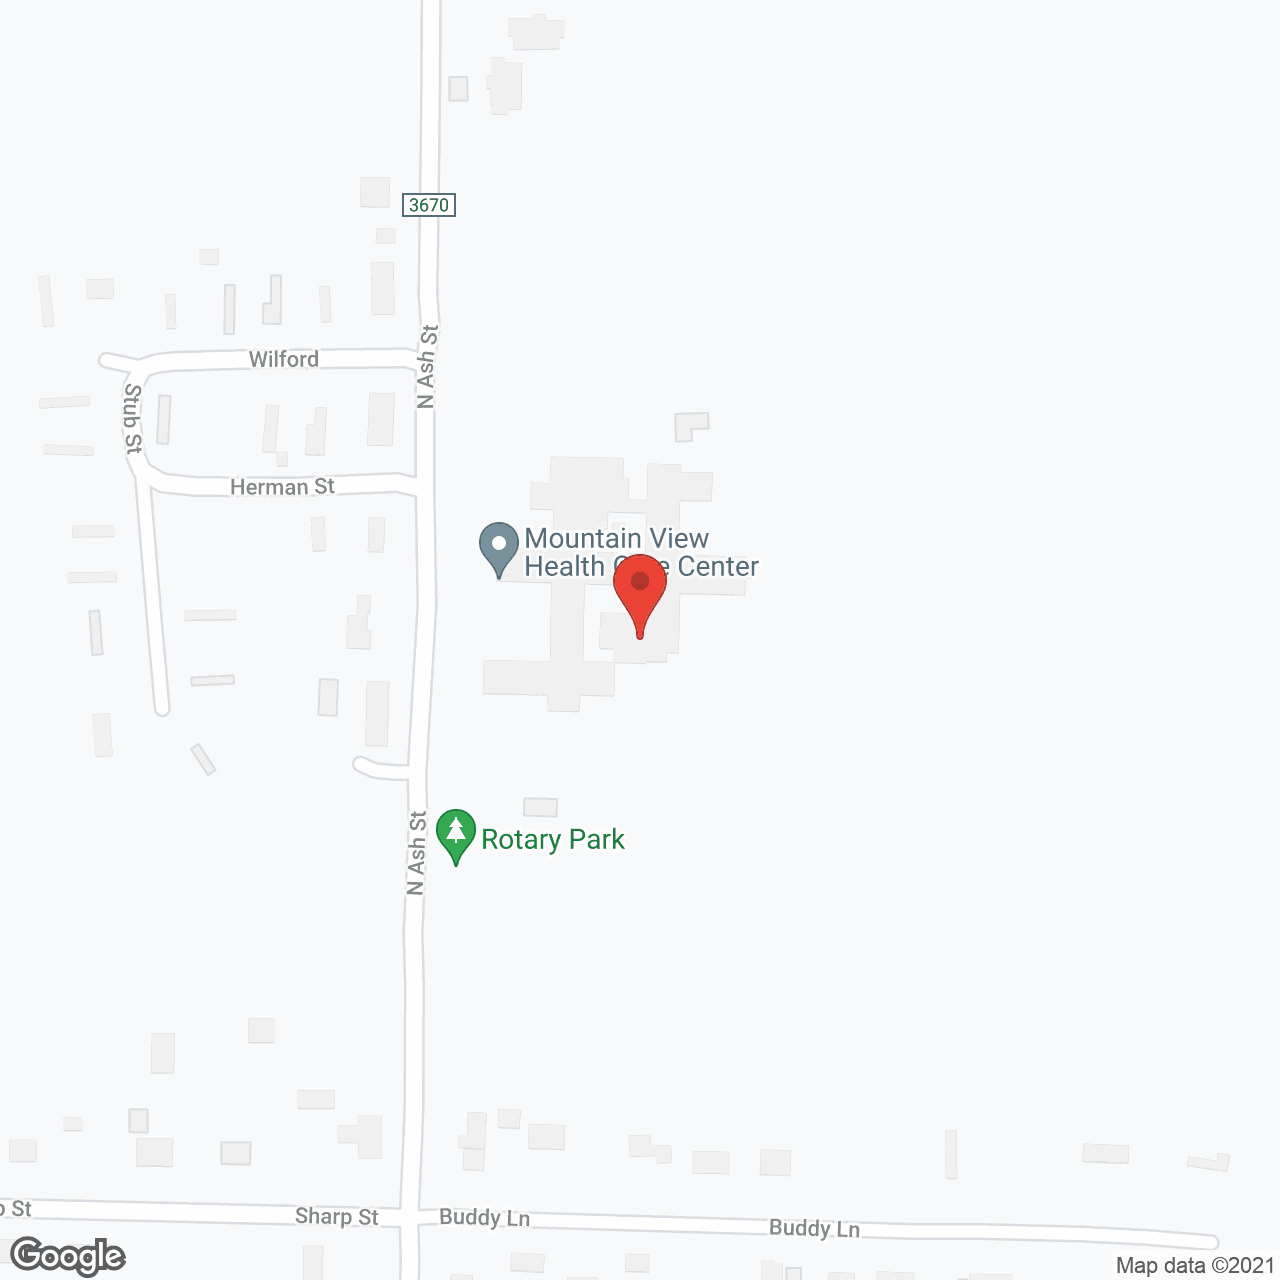 Mountain View Health Care Ctr in google map